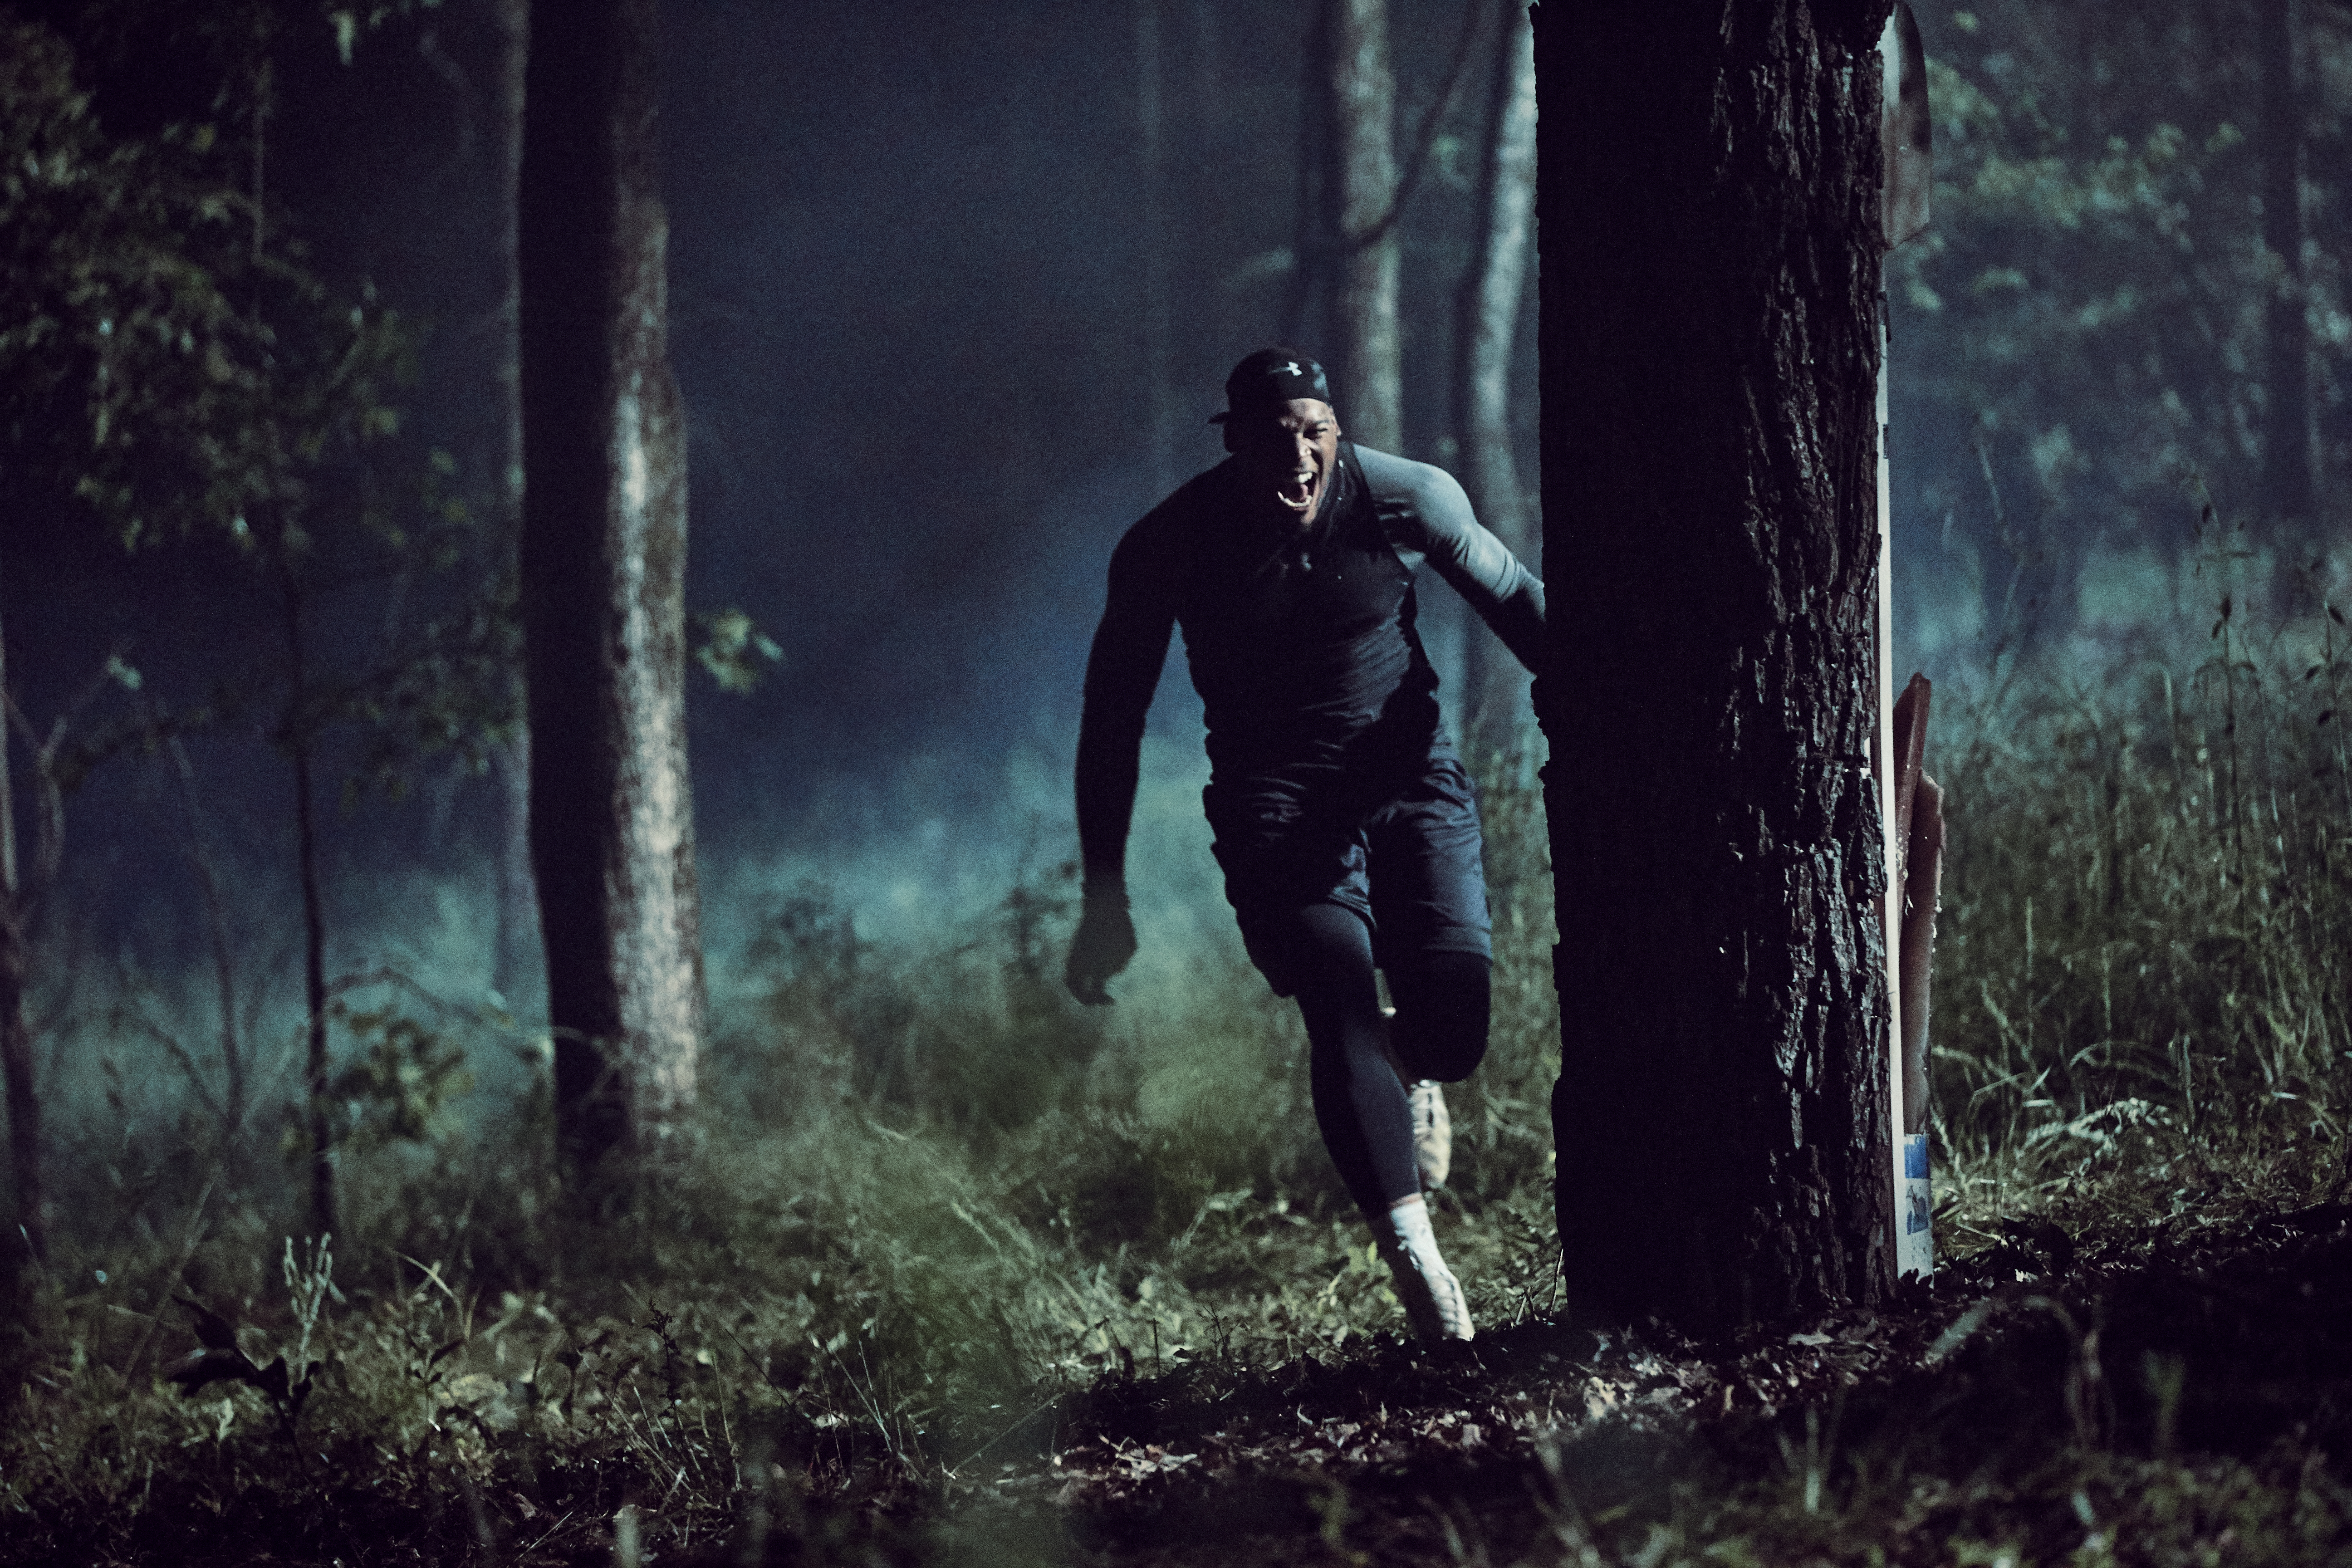 amante Bañera fondo Cam Newton's new Under Armour ad is packed with hidden meaning | For The Win